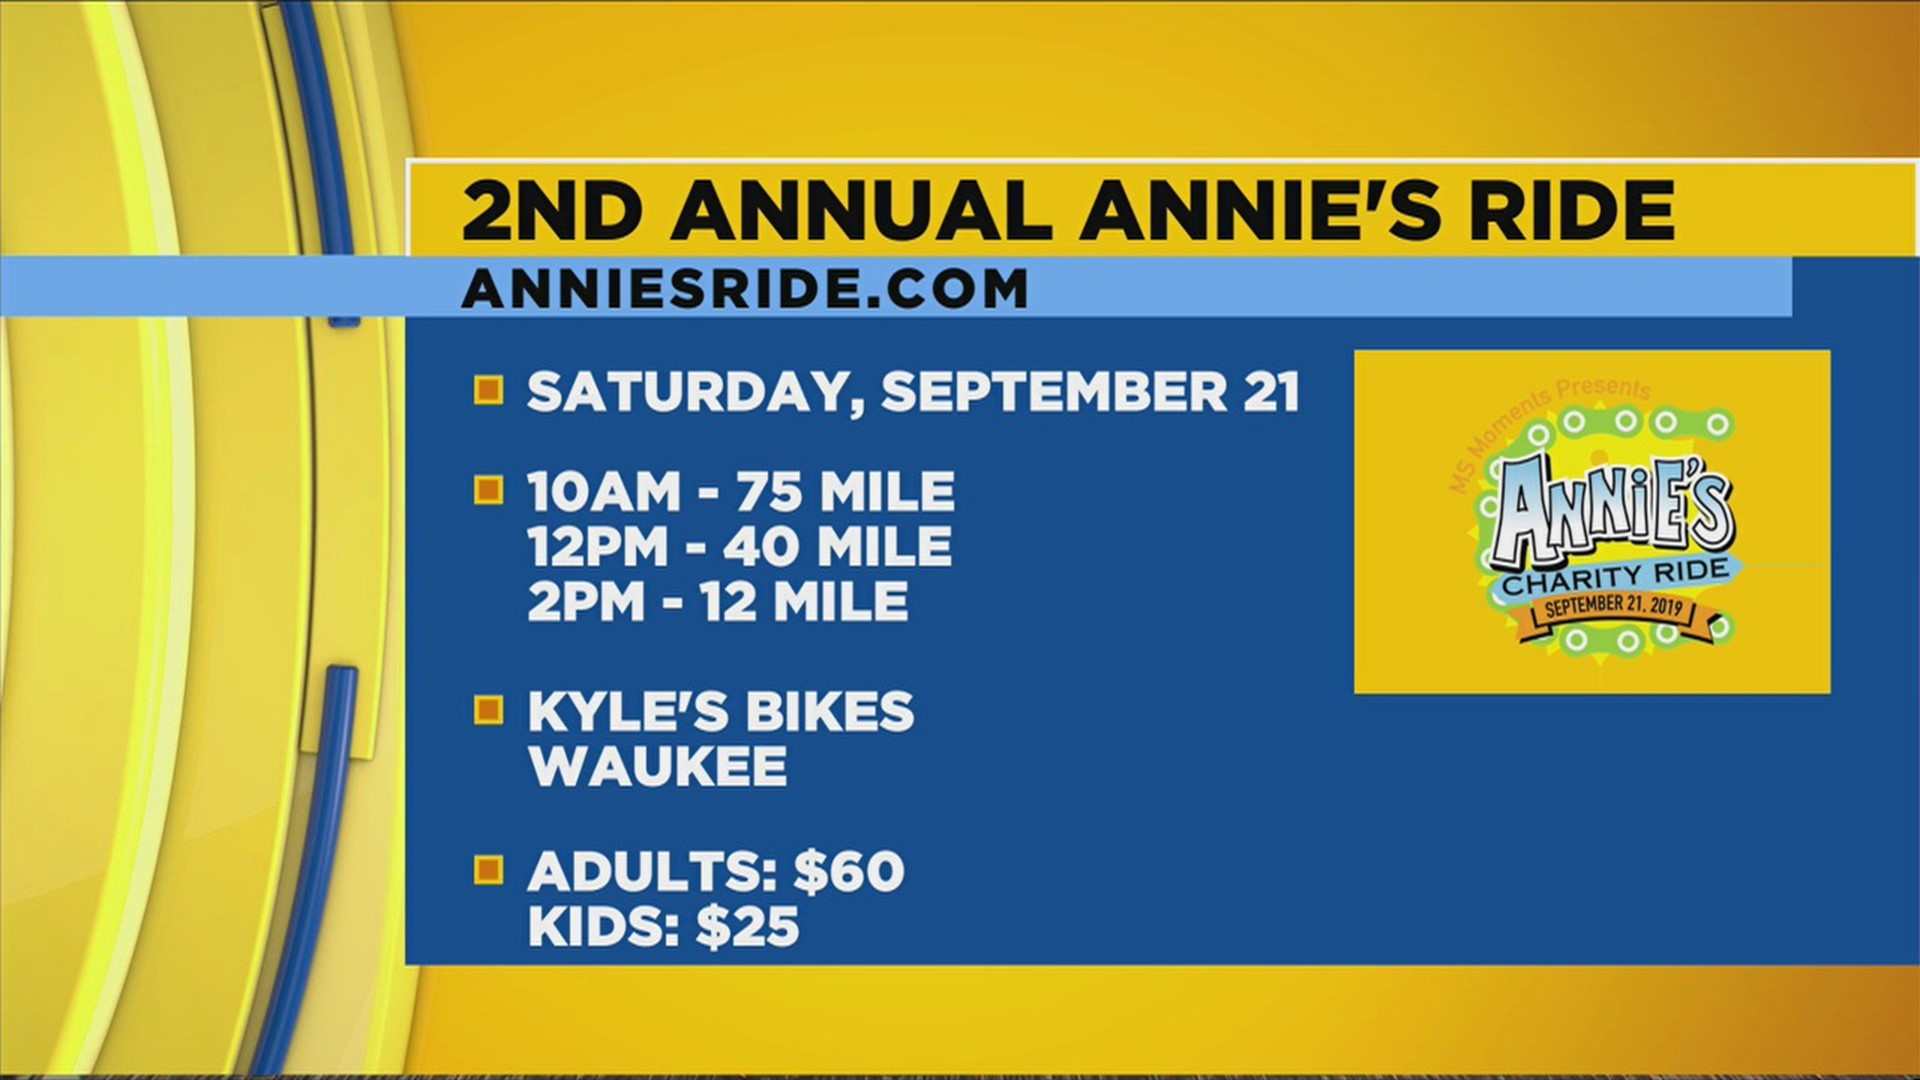 MS Moments - 2nd Annual Annie's Ride